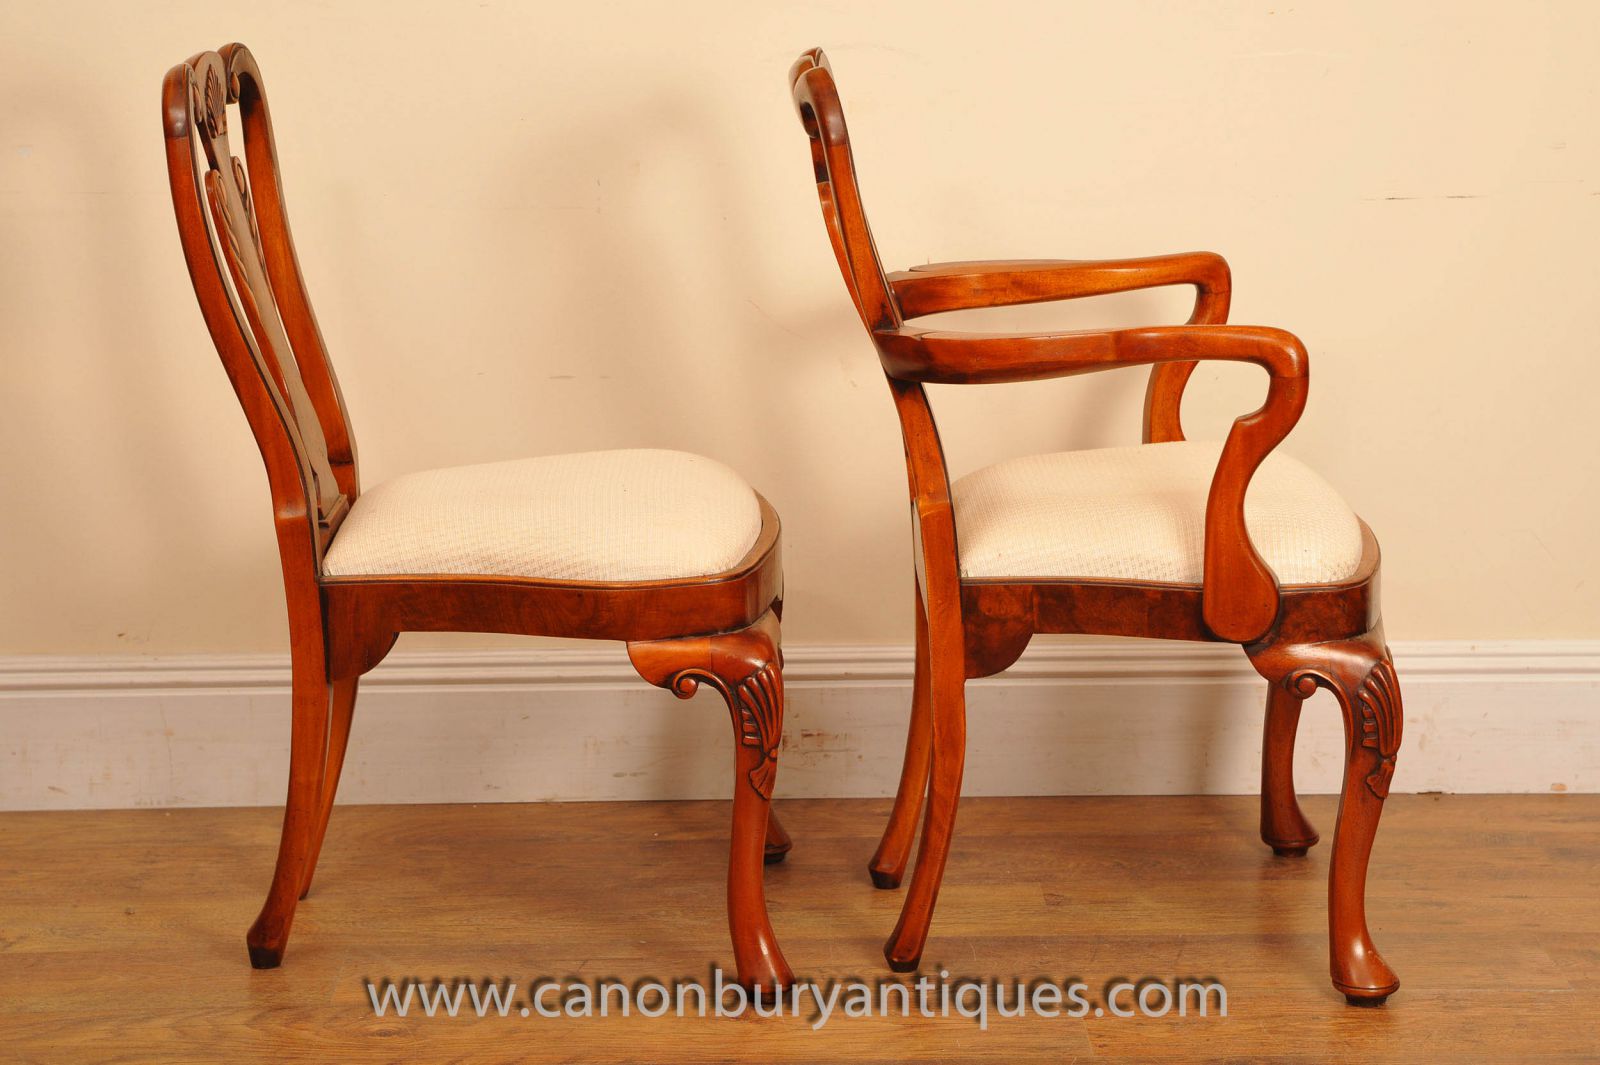 Large range of antique dining chairs